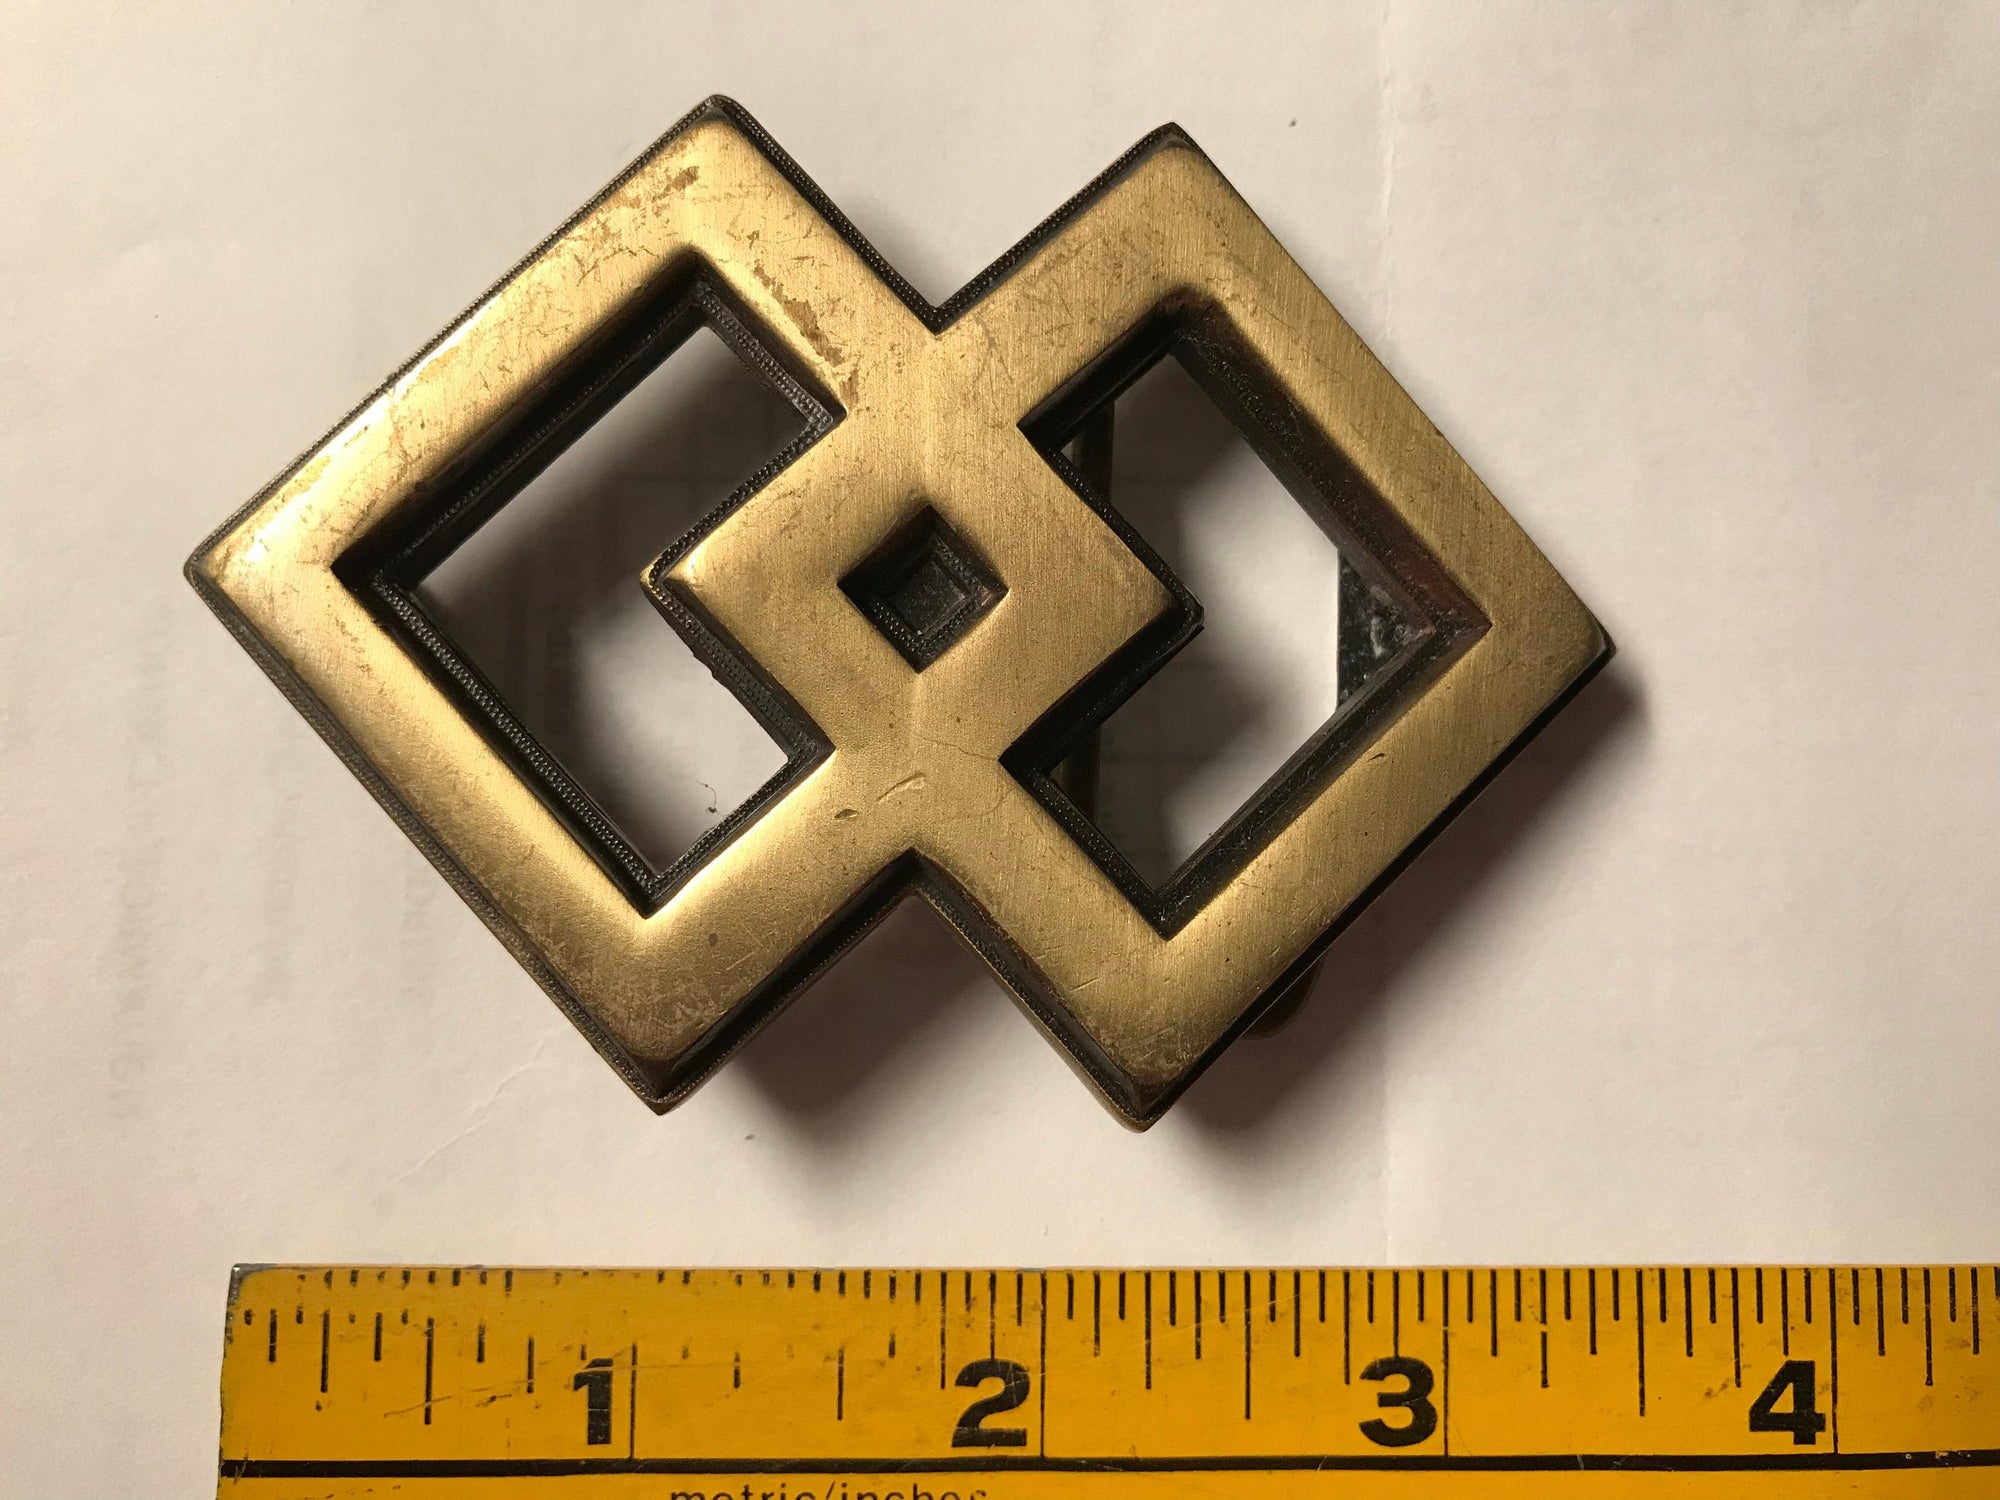 A Square Dance Buckle with an interlocking design, positioned next to a ruler, made by Square Up Fashions.